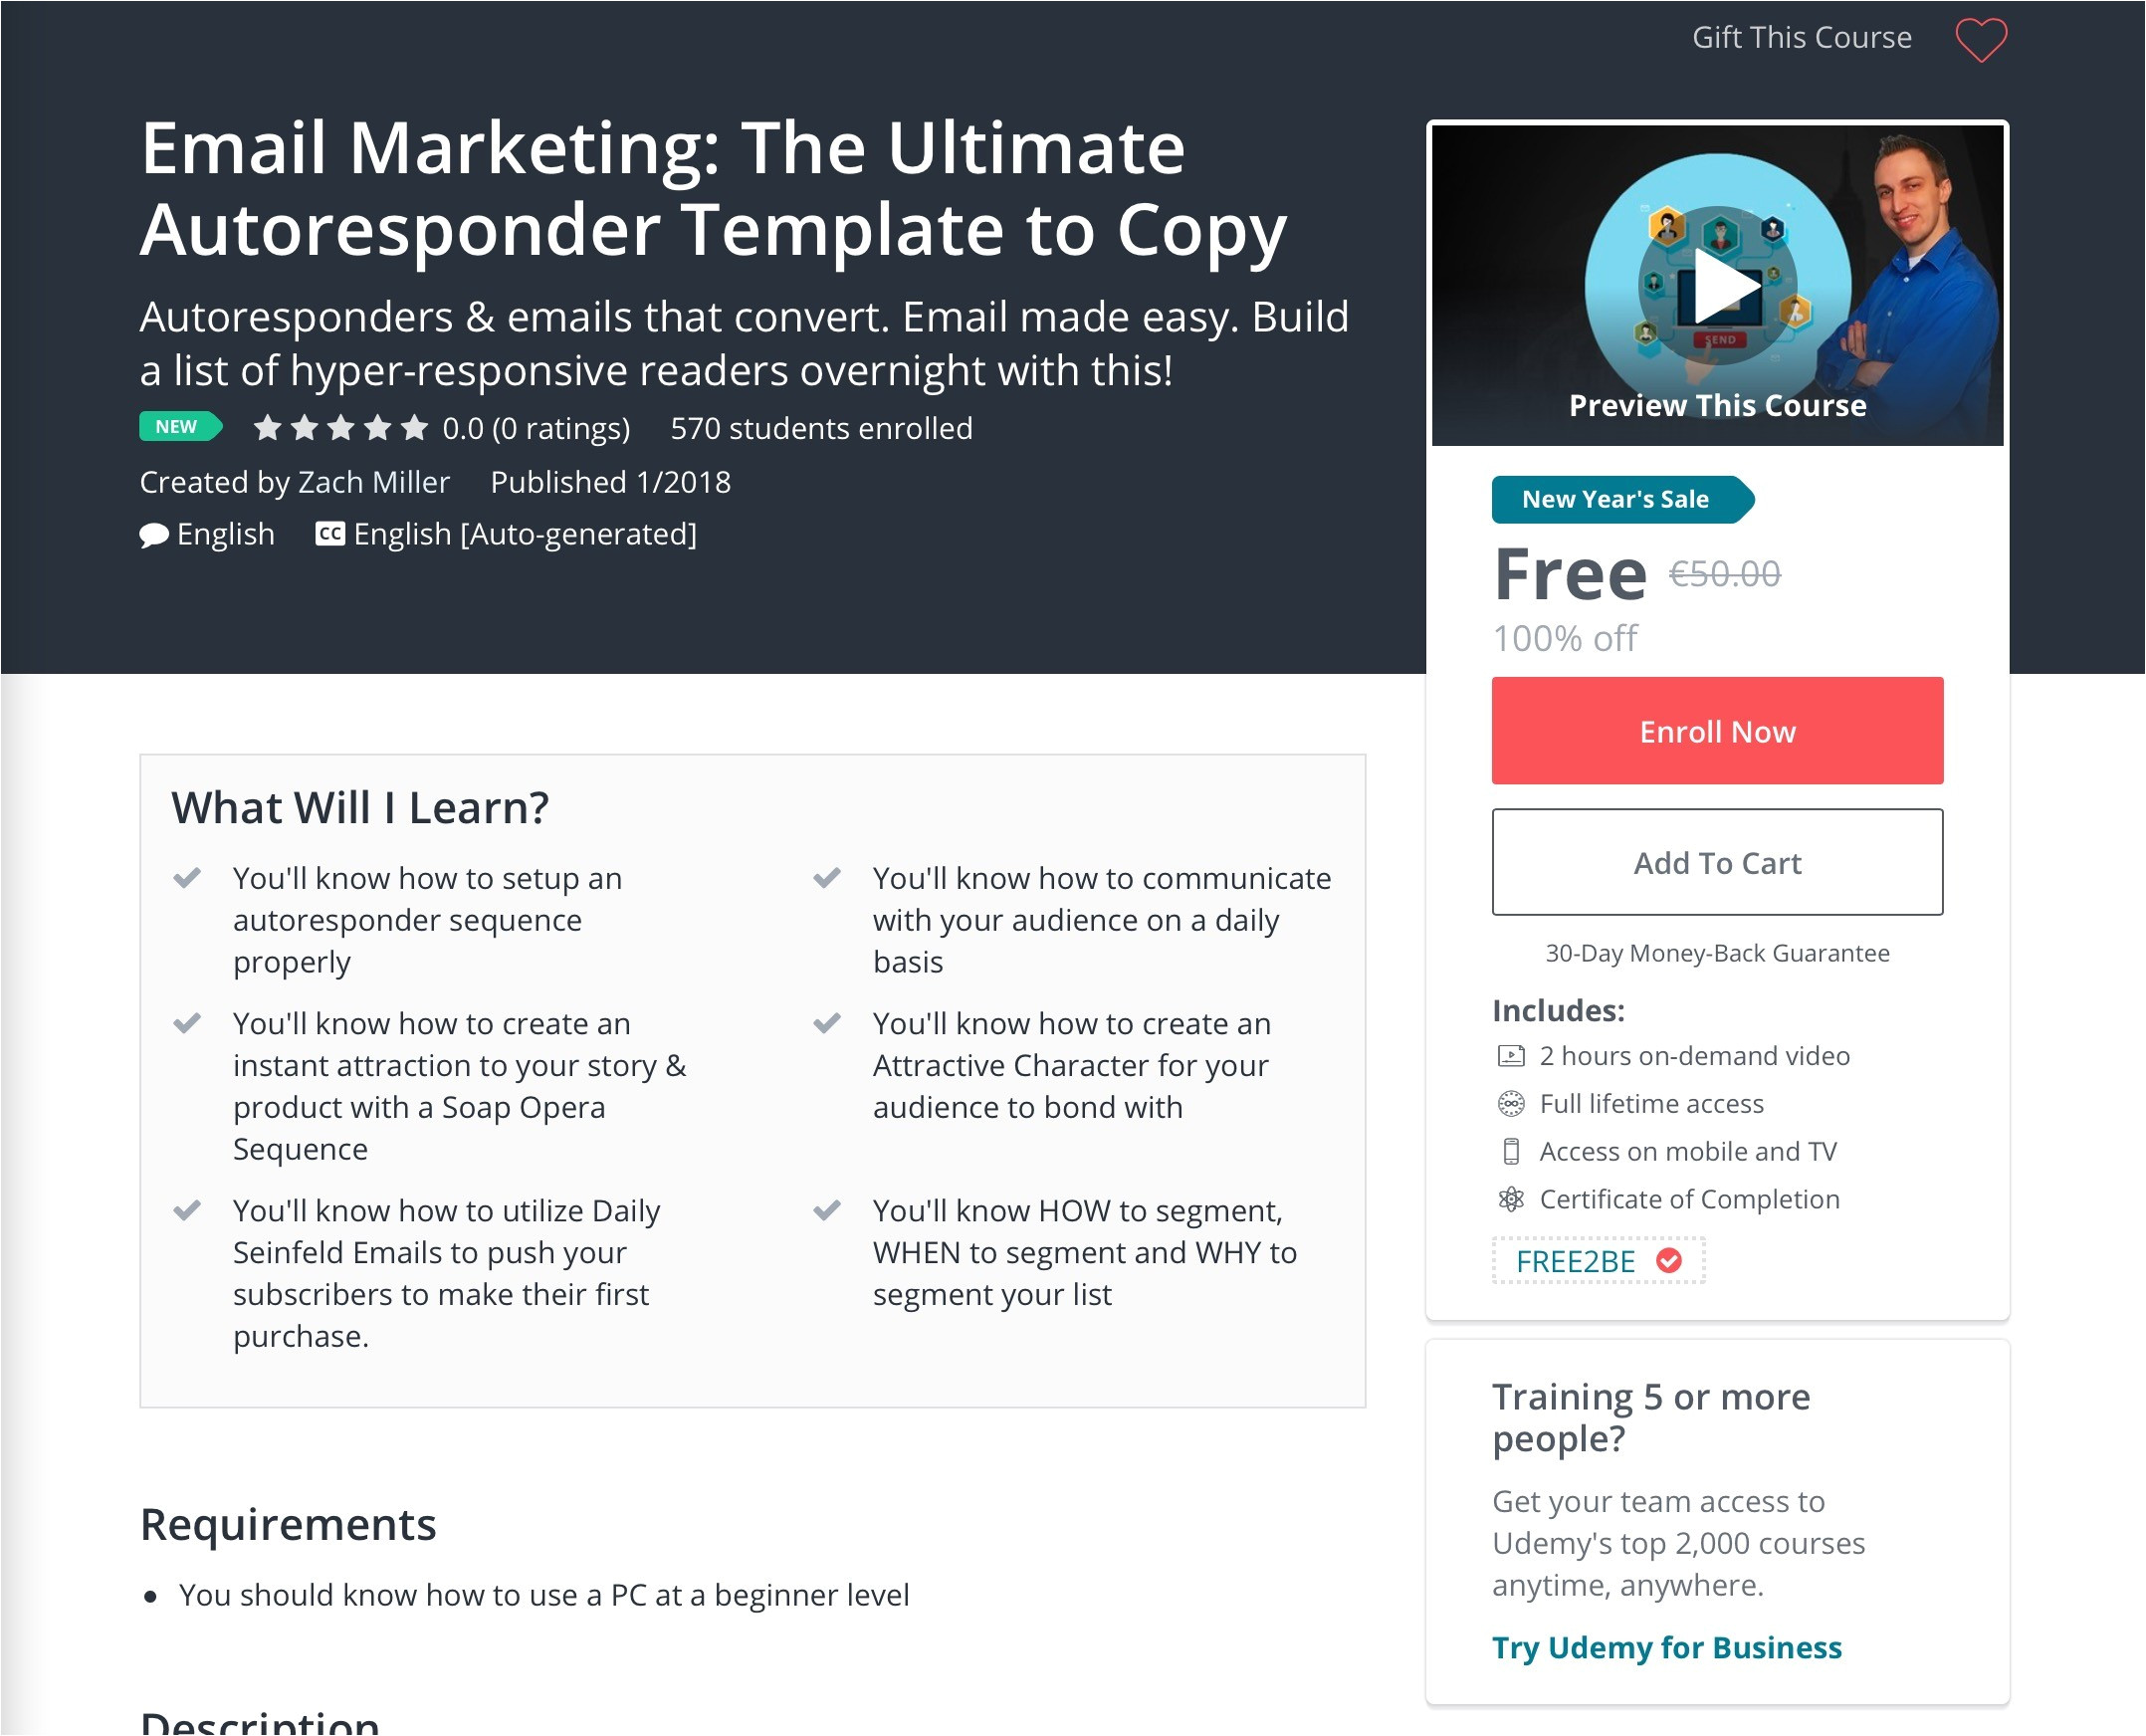 The Ultimate Email Marketing Template Series Review Comidoc Email Marketing the Ultimate Autoresponder